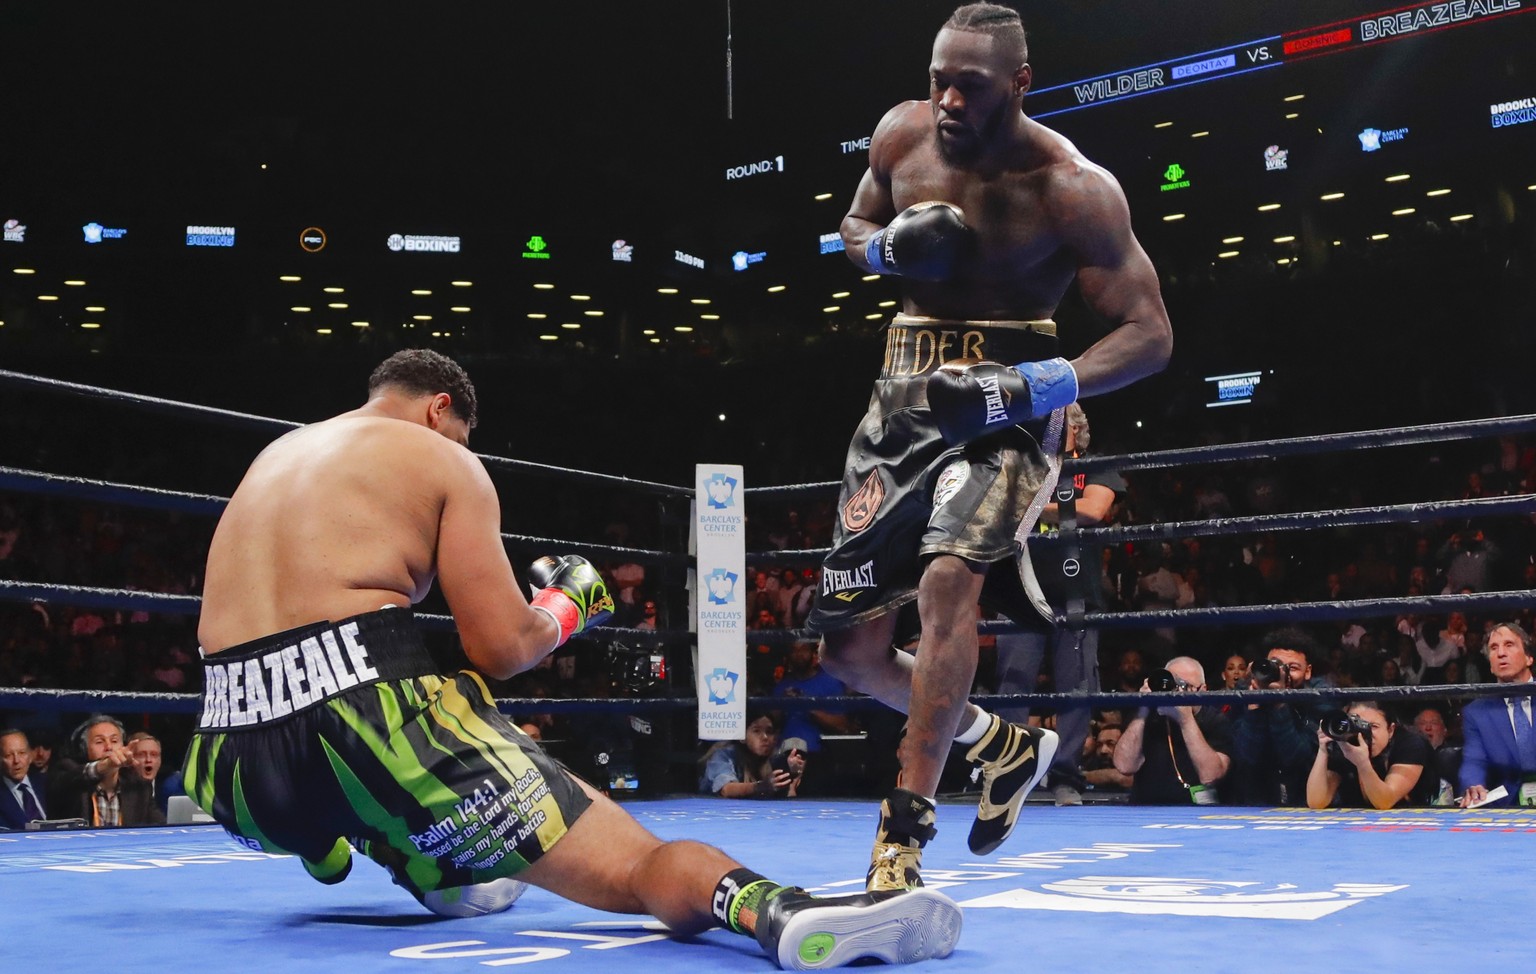 Deontay Wilder, left, knocks down Dominic Breazeale during the first round of the WBC heavyweight championship boxing match Saturday, May 18, 2019, in New York. Wilder won in the first round. (AP Phot ...